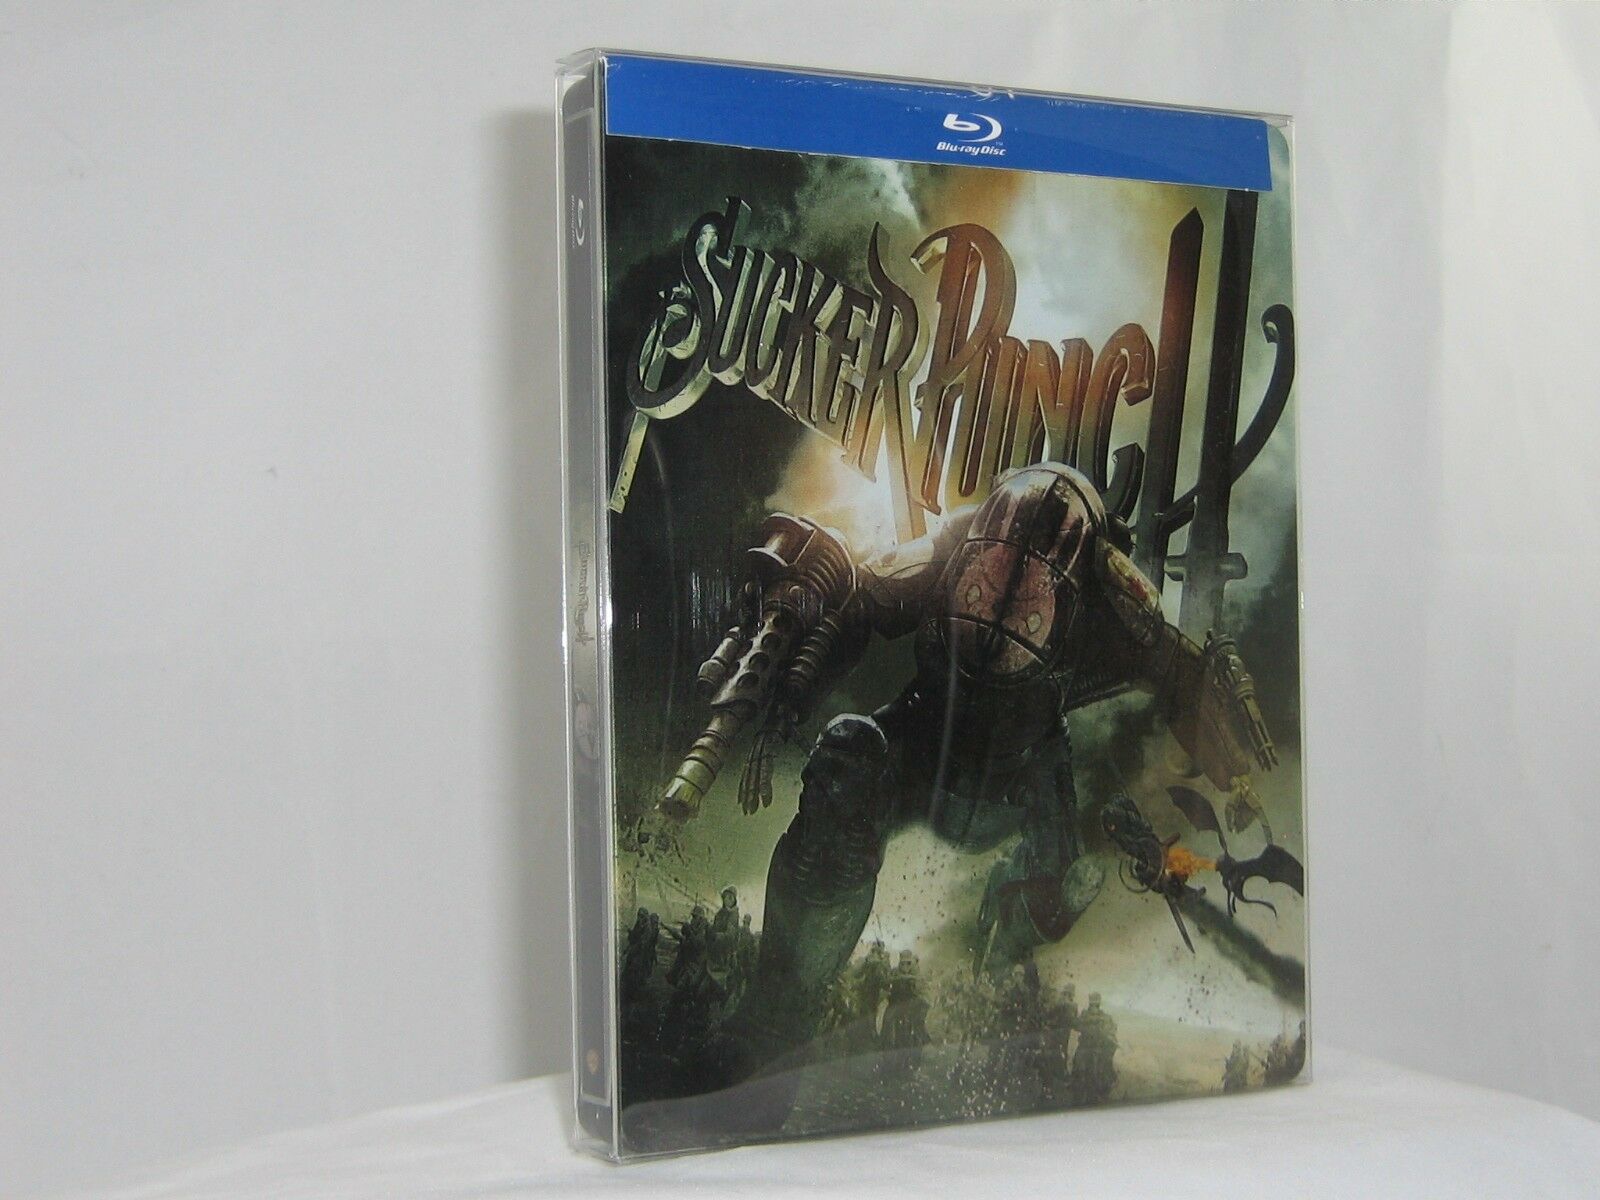 10 Steelbook Protective Sleeves / Slipcover Box Protectors Plastic Case / Cover